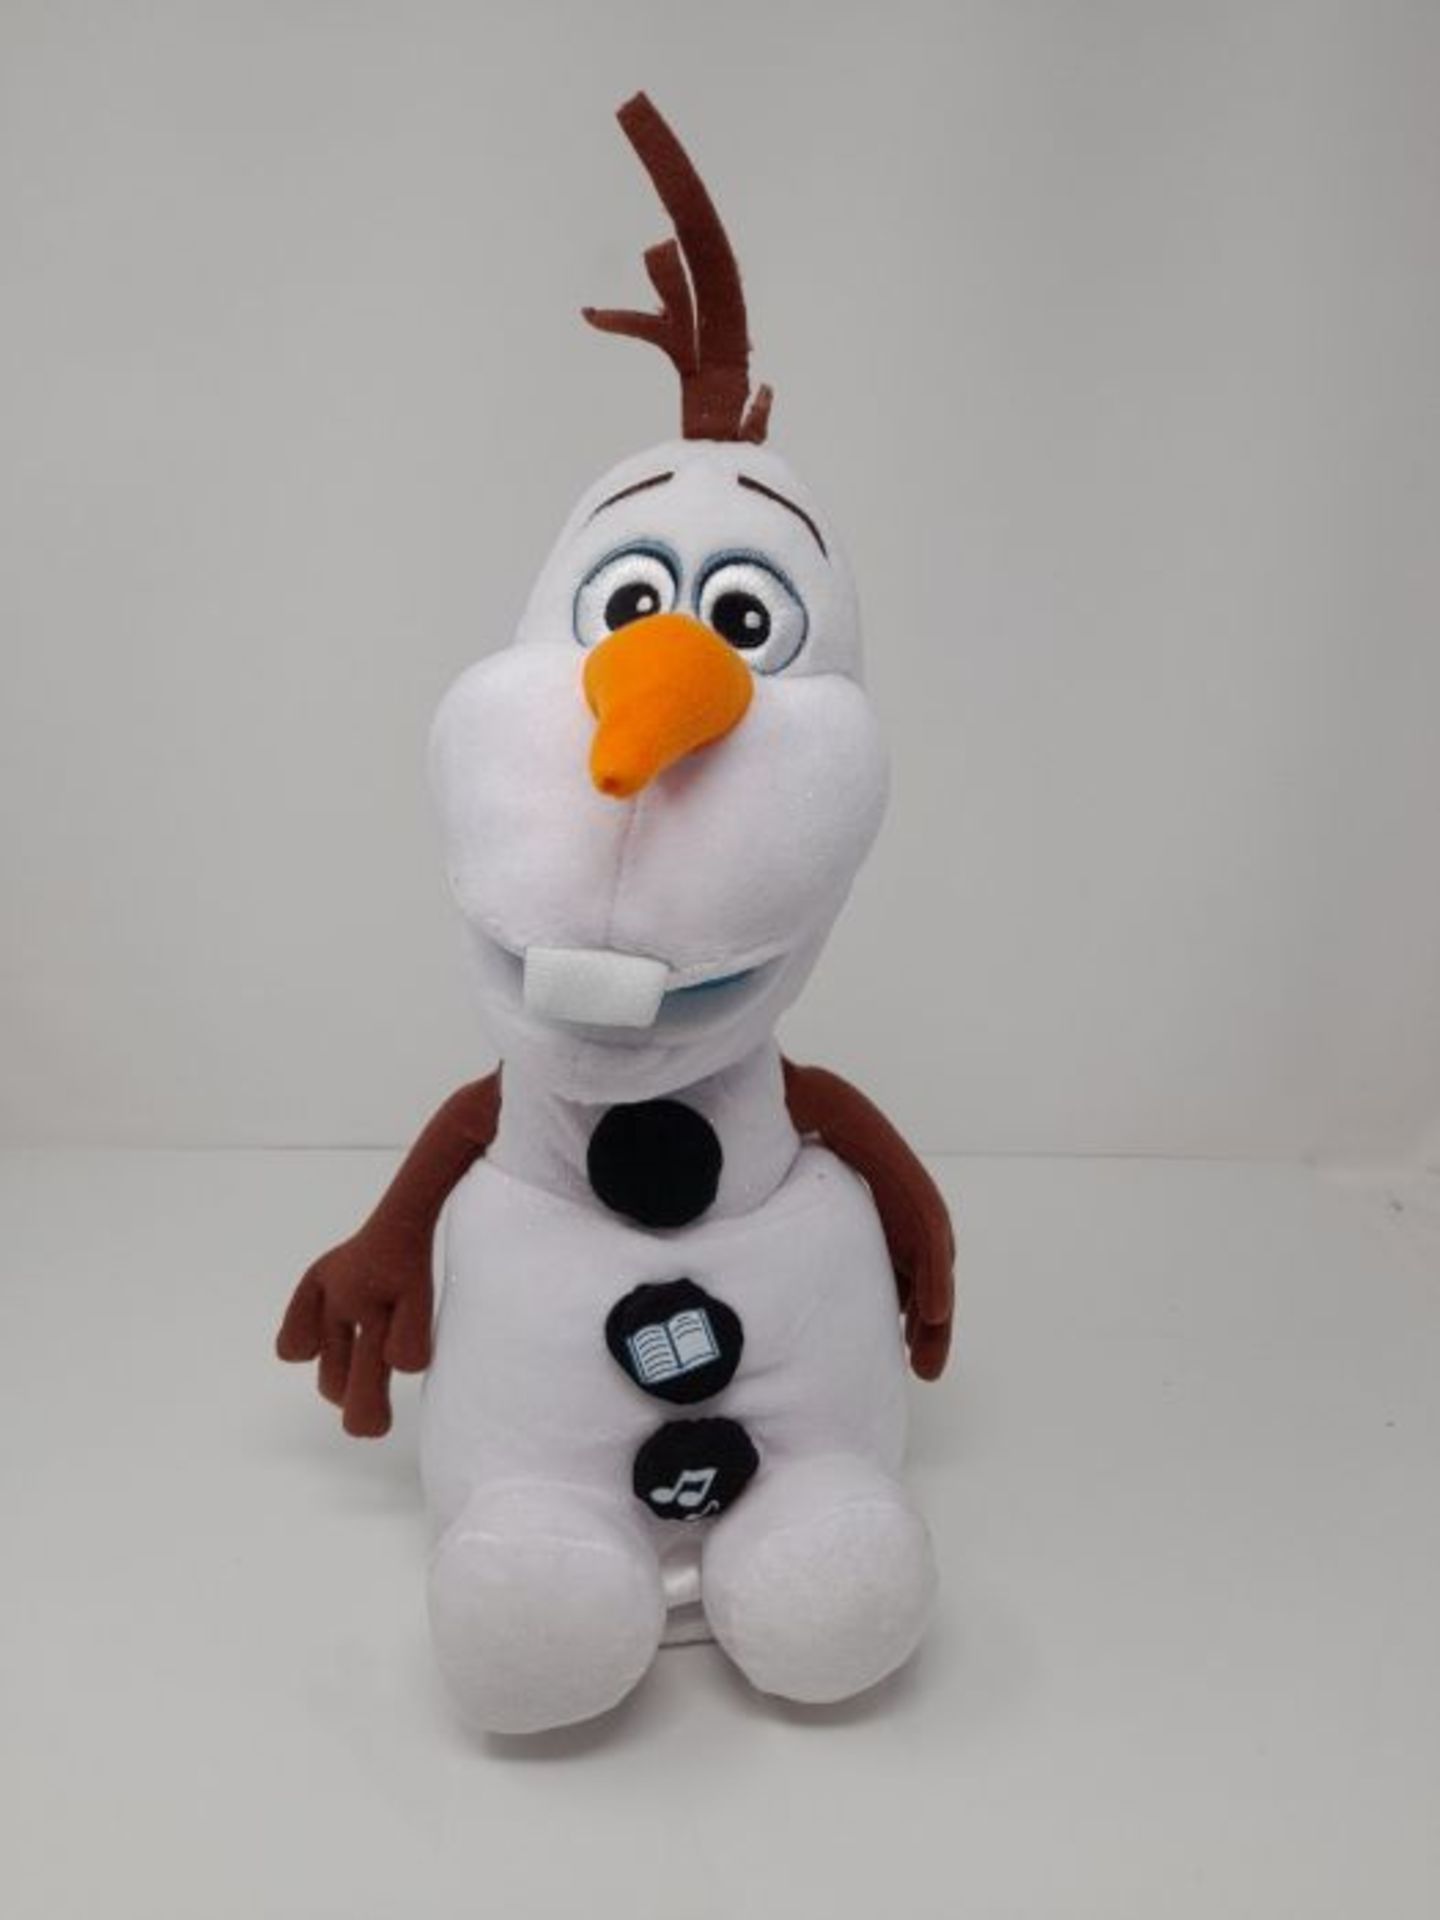 IMC Toys 17016 Olaf Tales and Songs Interactive Soft Toy - Frozen - Image 2 of 3